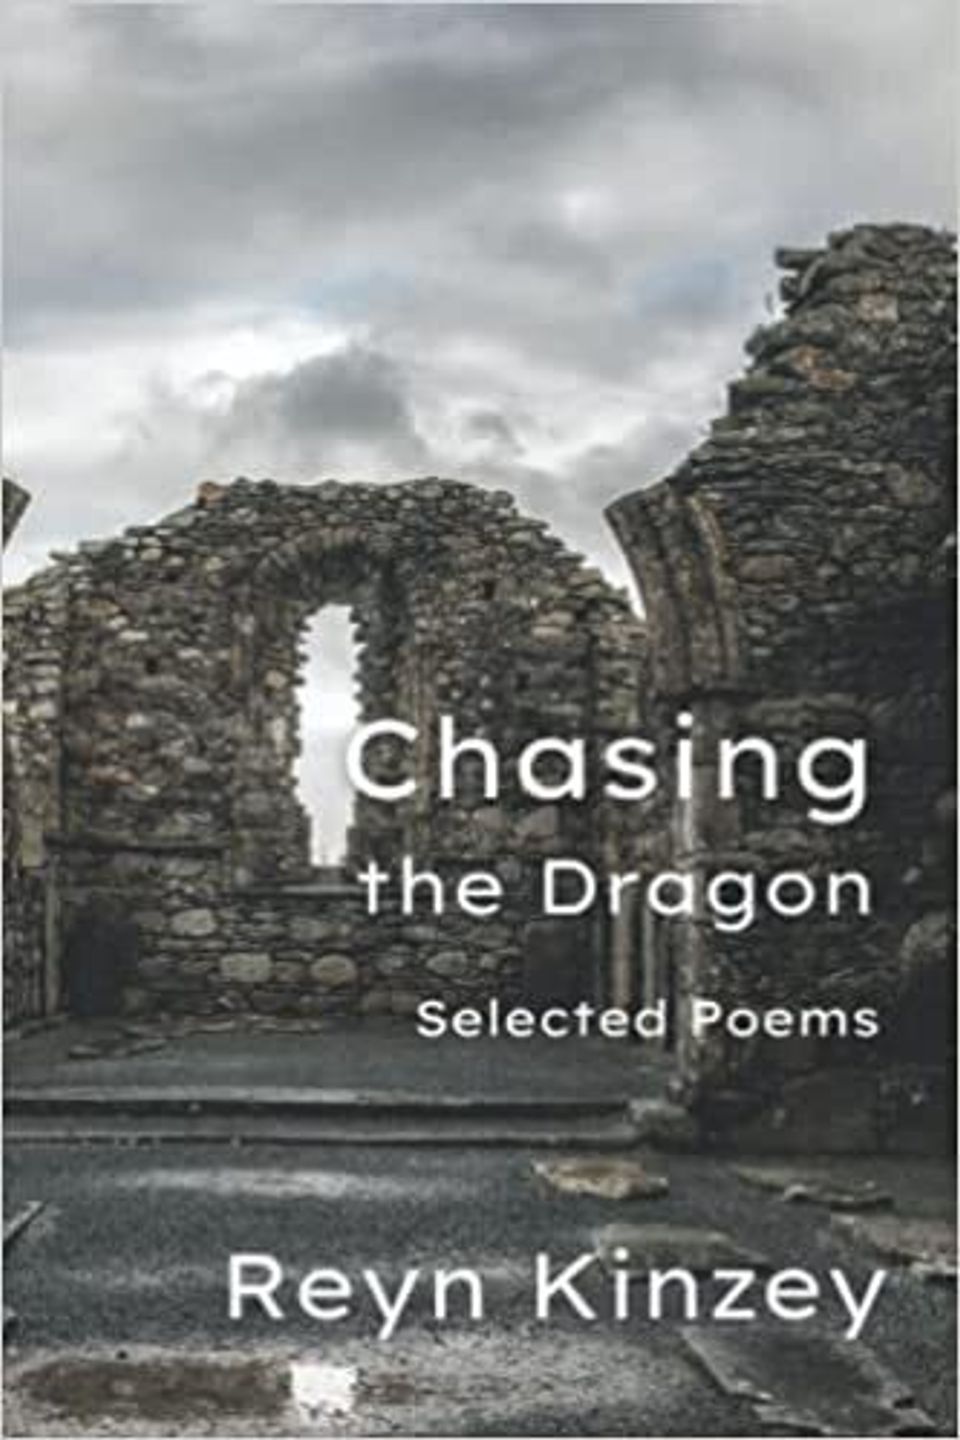 Chasing the dragon by r kinzey